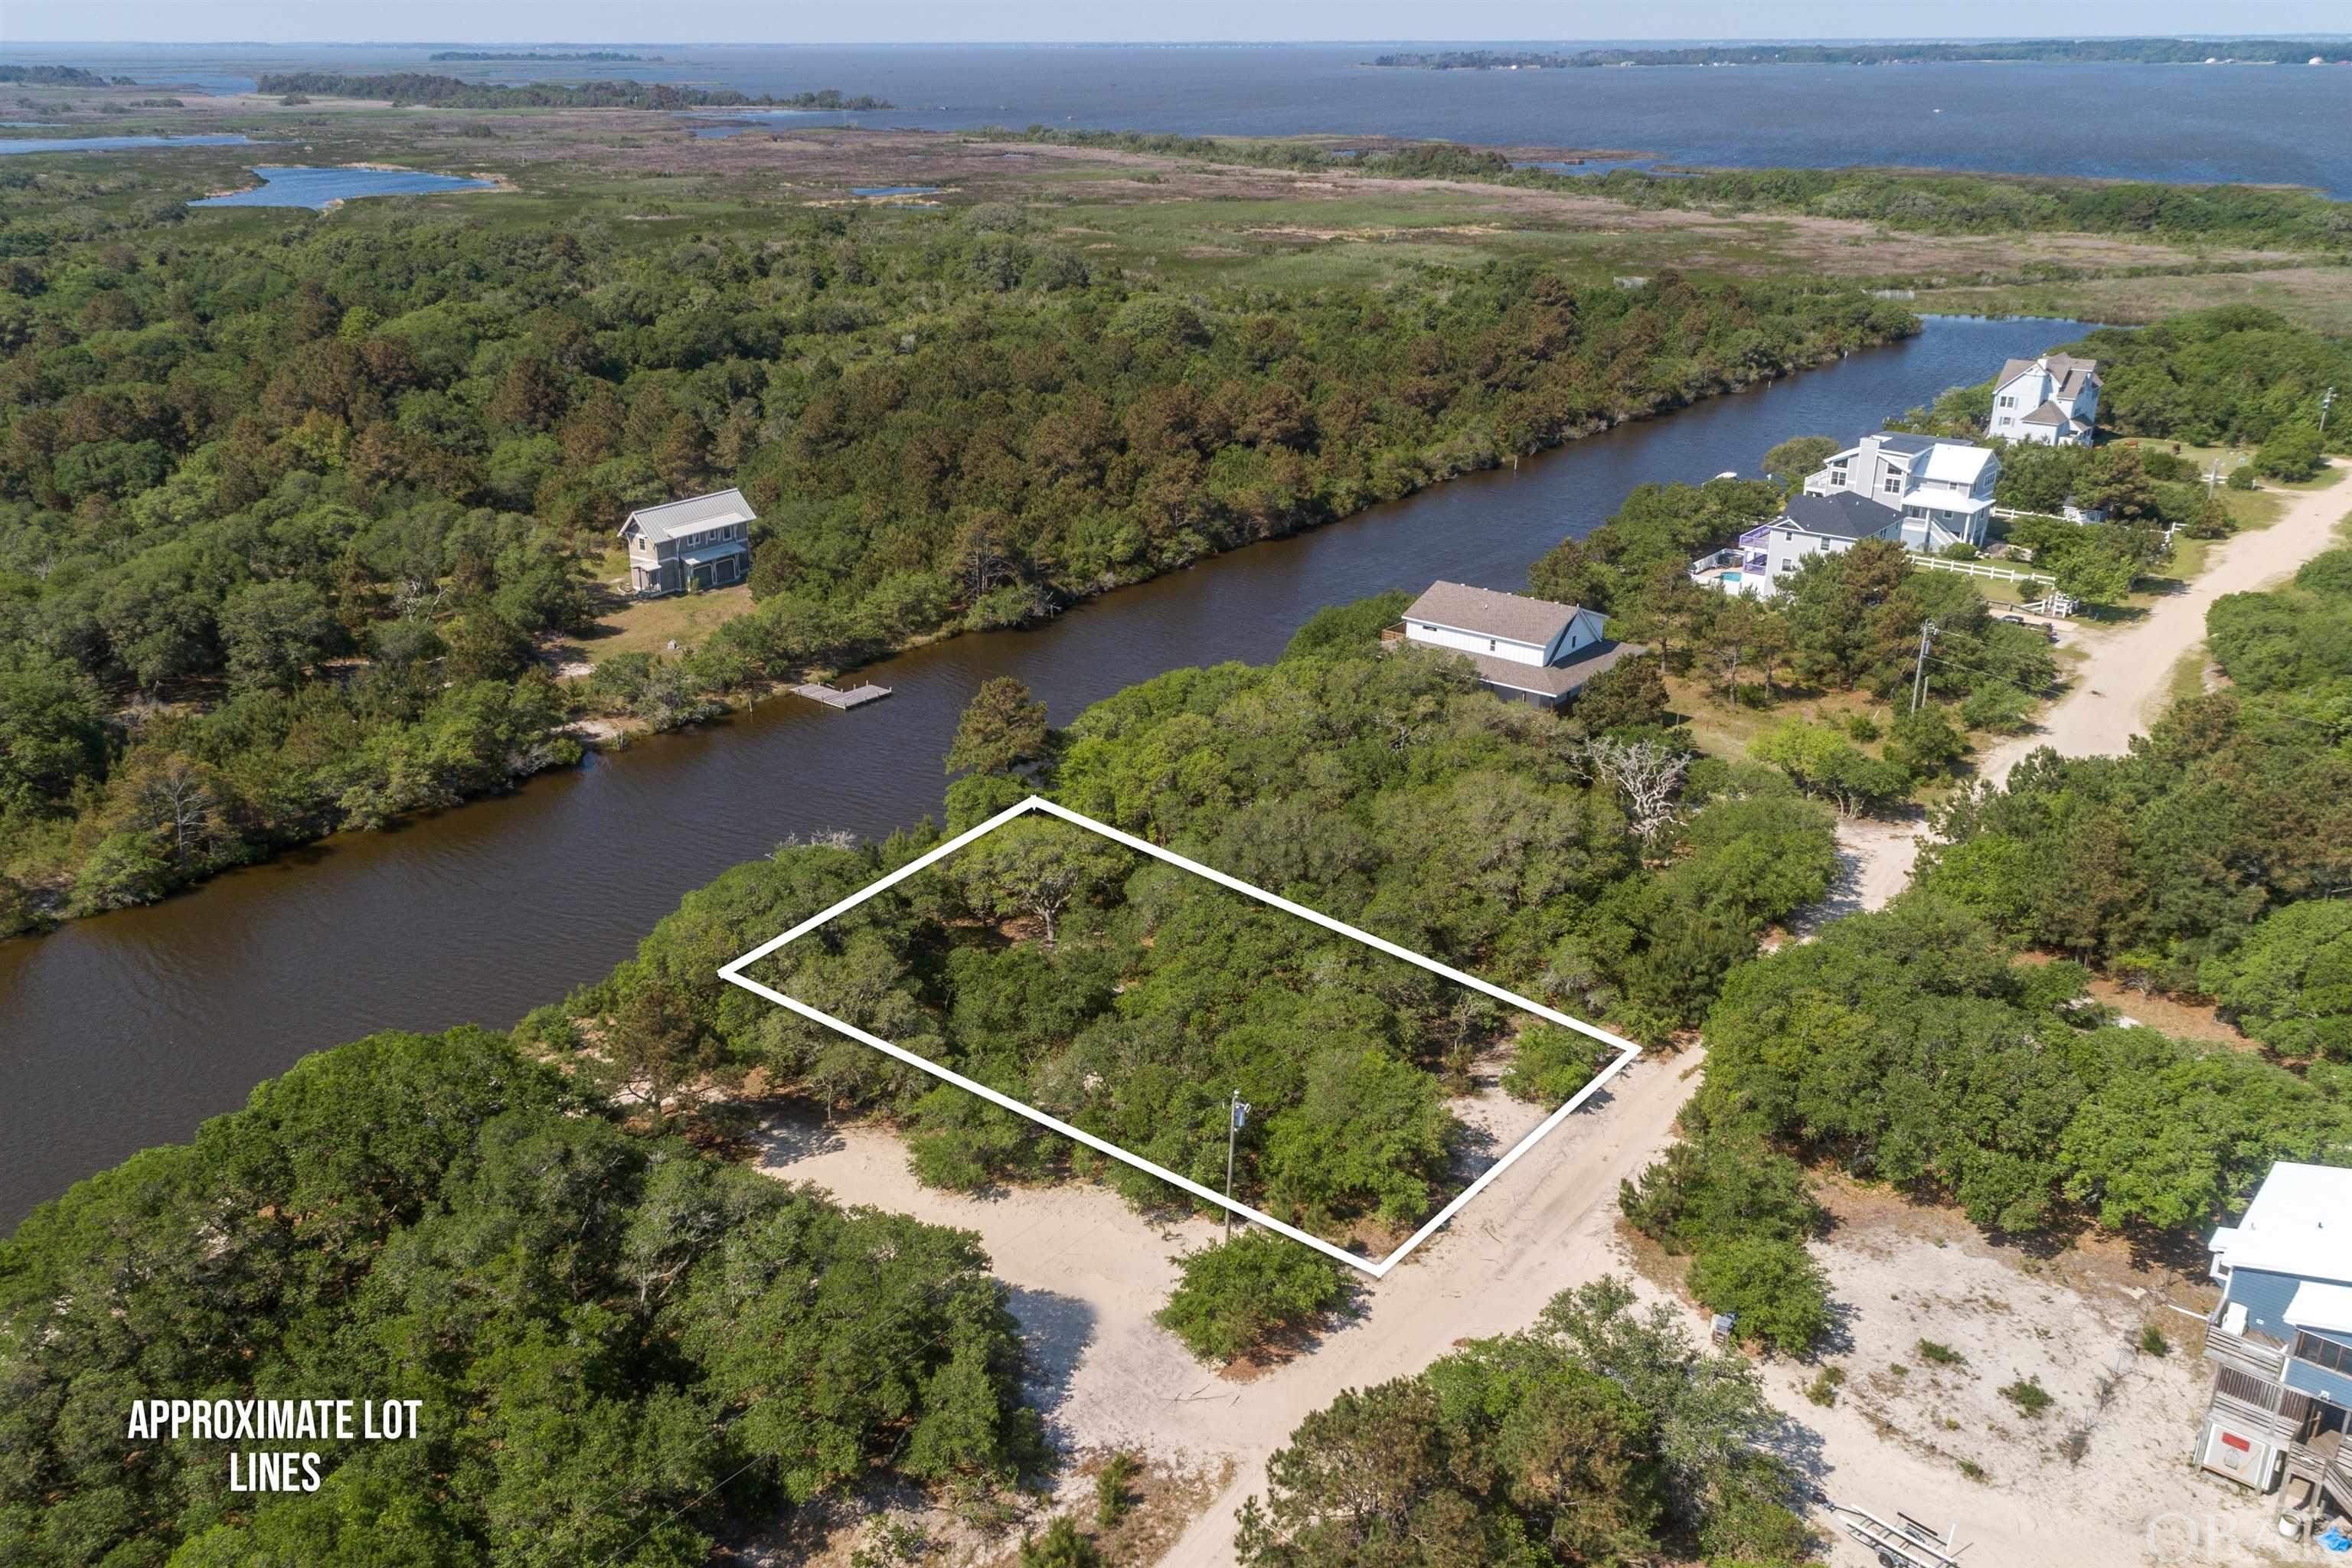 Beautiful Carova Beach Canal Front lot to build your home near the beach plus quick access to the Sound. Here is the lot that you have been waiting for and it is just a short distance to the Beach.  This lot offers Water Views and privacy overlooking the Views of the Wildlife Preserve plus additional privacy, as the lot is located near the end of a dead end road. The Carova Beach Park and Boat Ramp are close by on the corner of Ocean Pearl Road and Scoter Road.  If you are looking for a Lot with privacy on a canal, southern exposure and a short distance to the beach to build your home, then this is the lot for you.  Call now to schedule a showing of this lot located in the 4 Wheel Drive Area of Corolla.